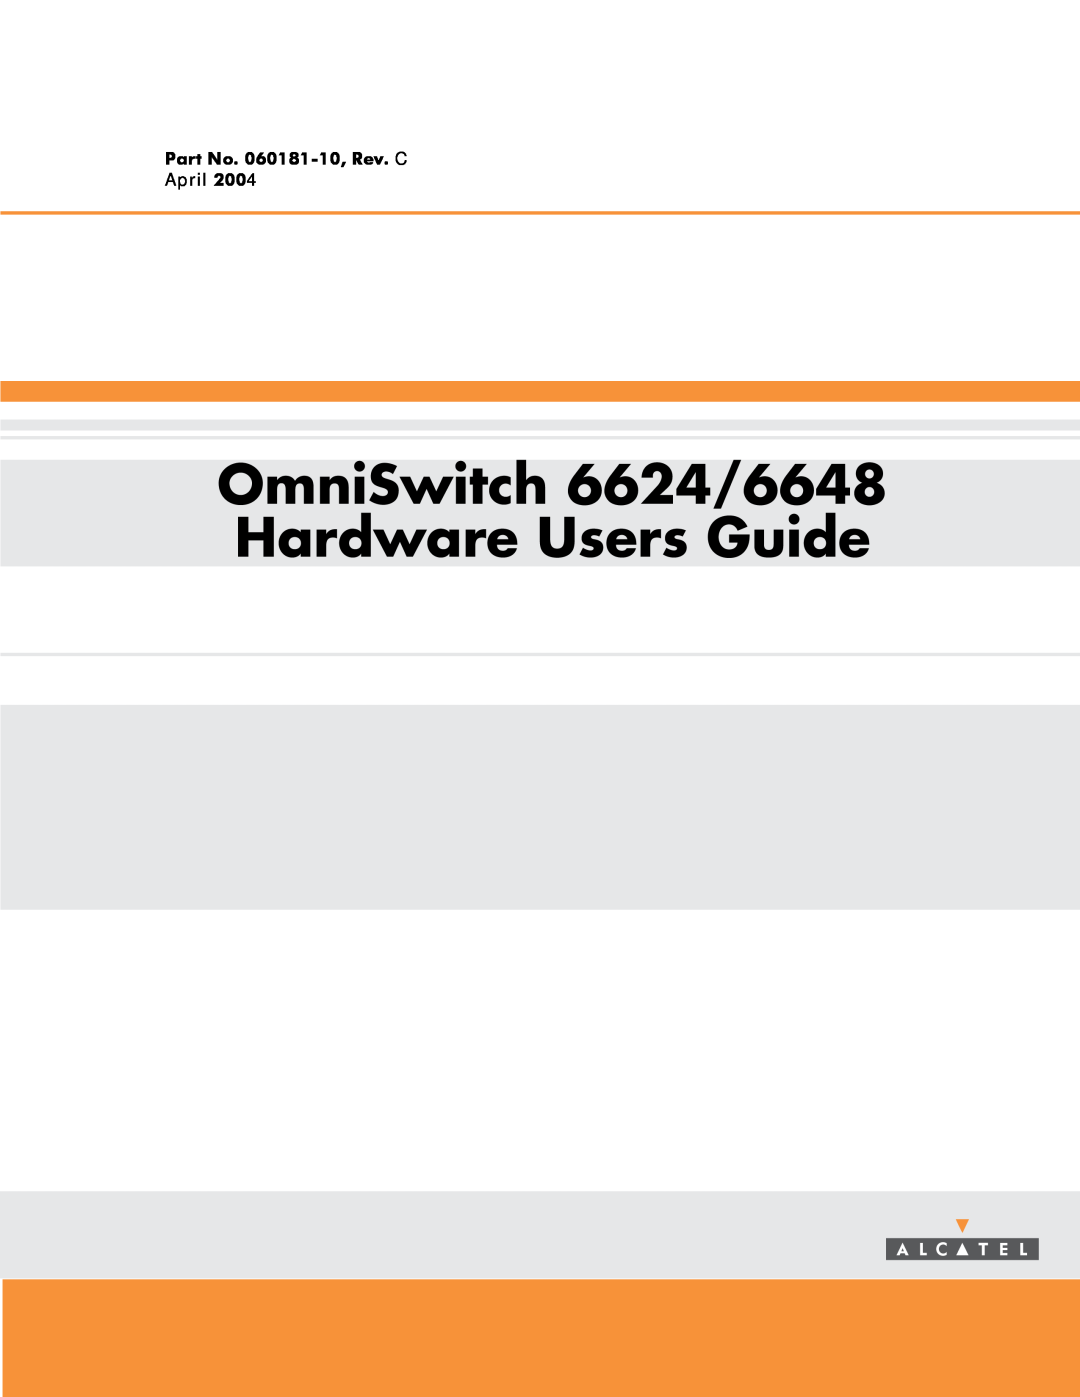 Alcatel-Lucent 6600 Series manual OmniSwitch 6624/6648 Hardware Users Guide, Part No. 060181-10, Rev. C April 